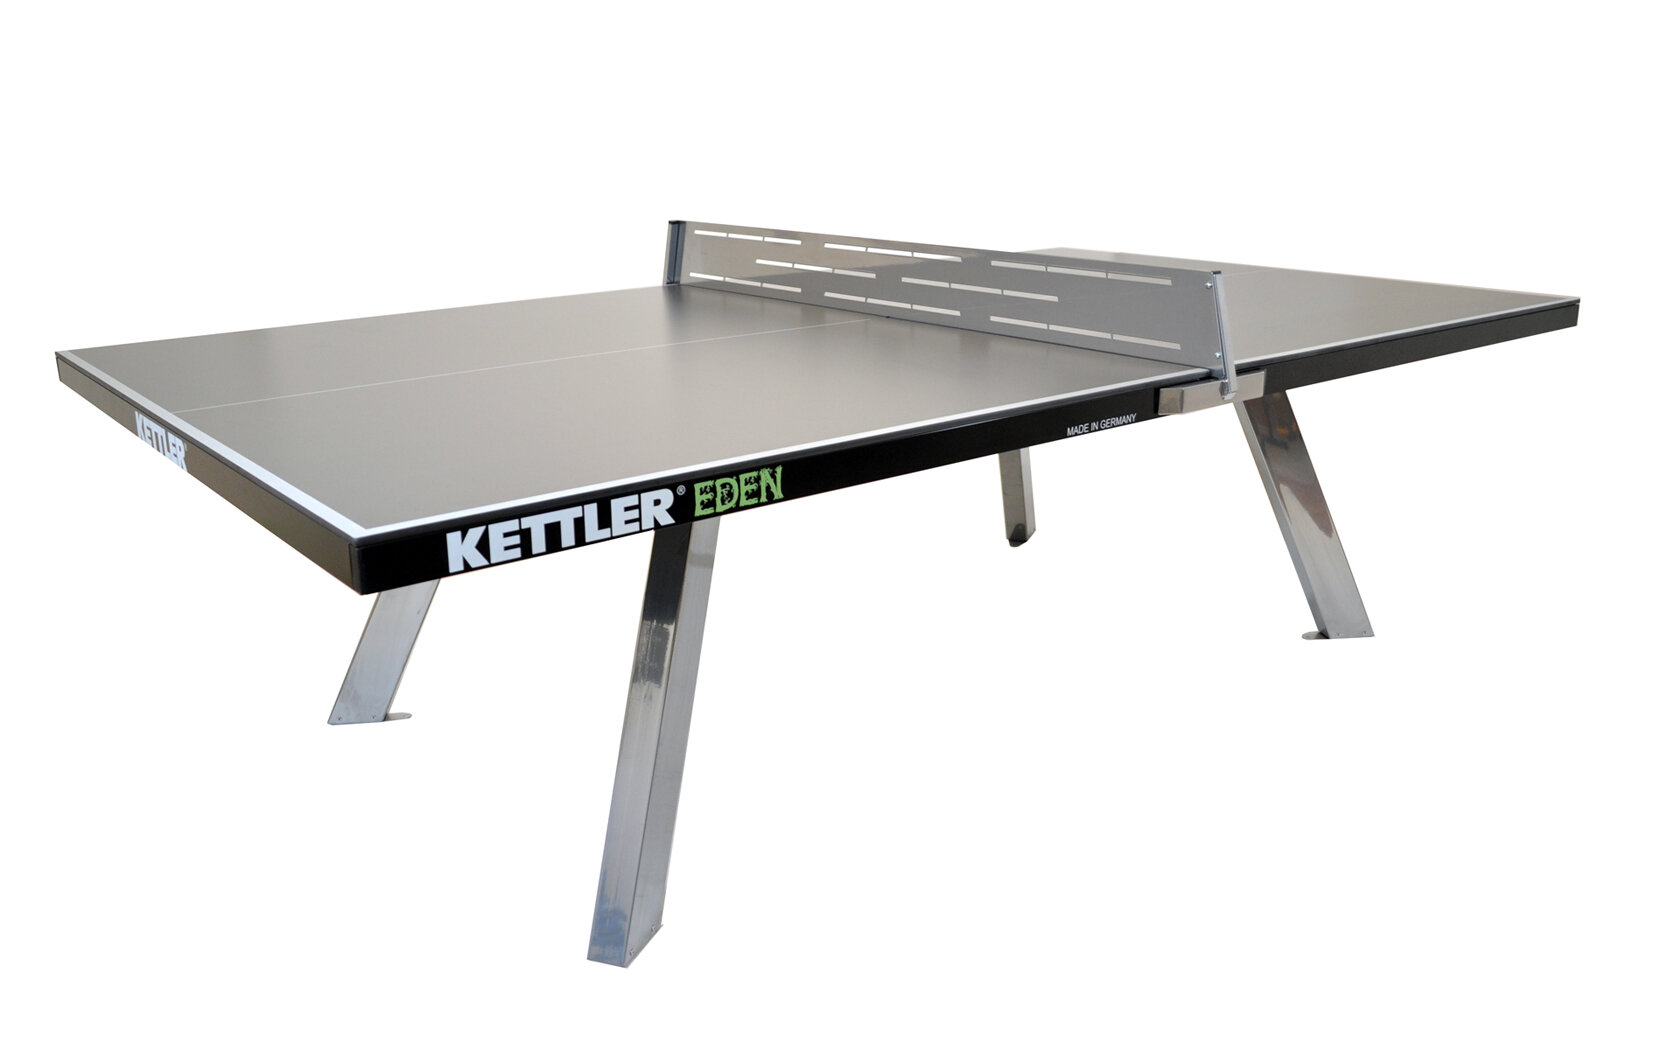 Ping Pong Tennis Table Folding Tournament Size Game Set Indoor Outdoor 